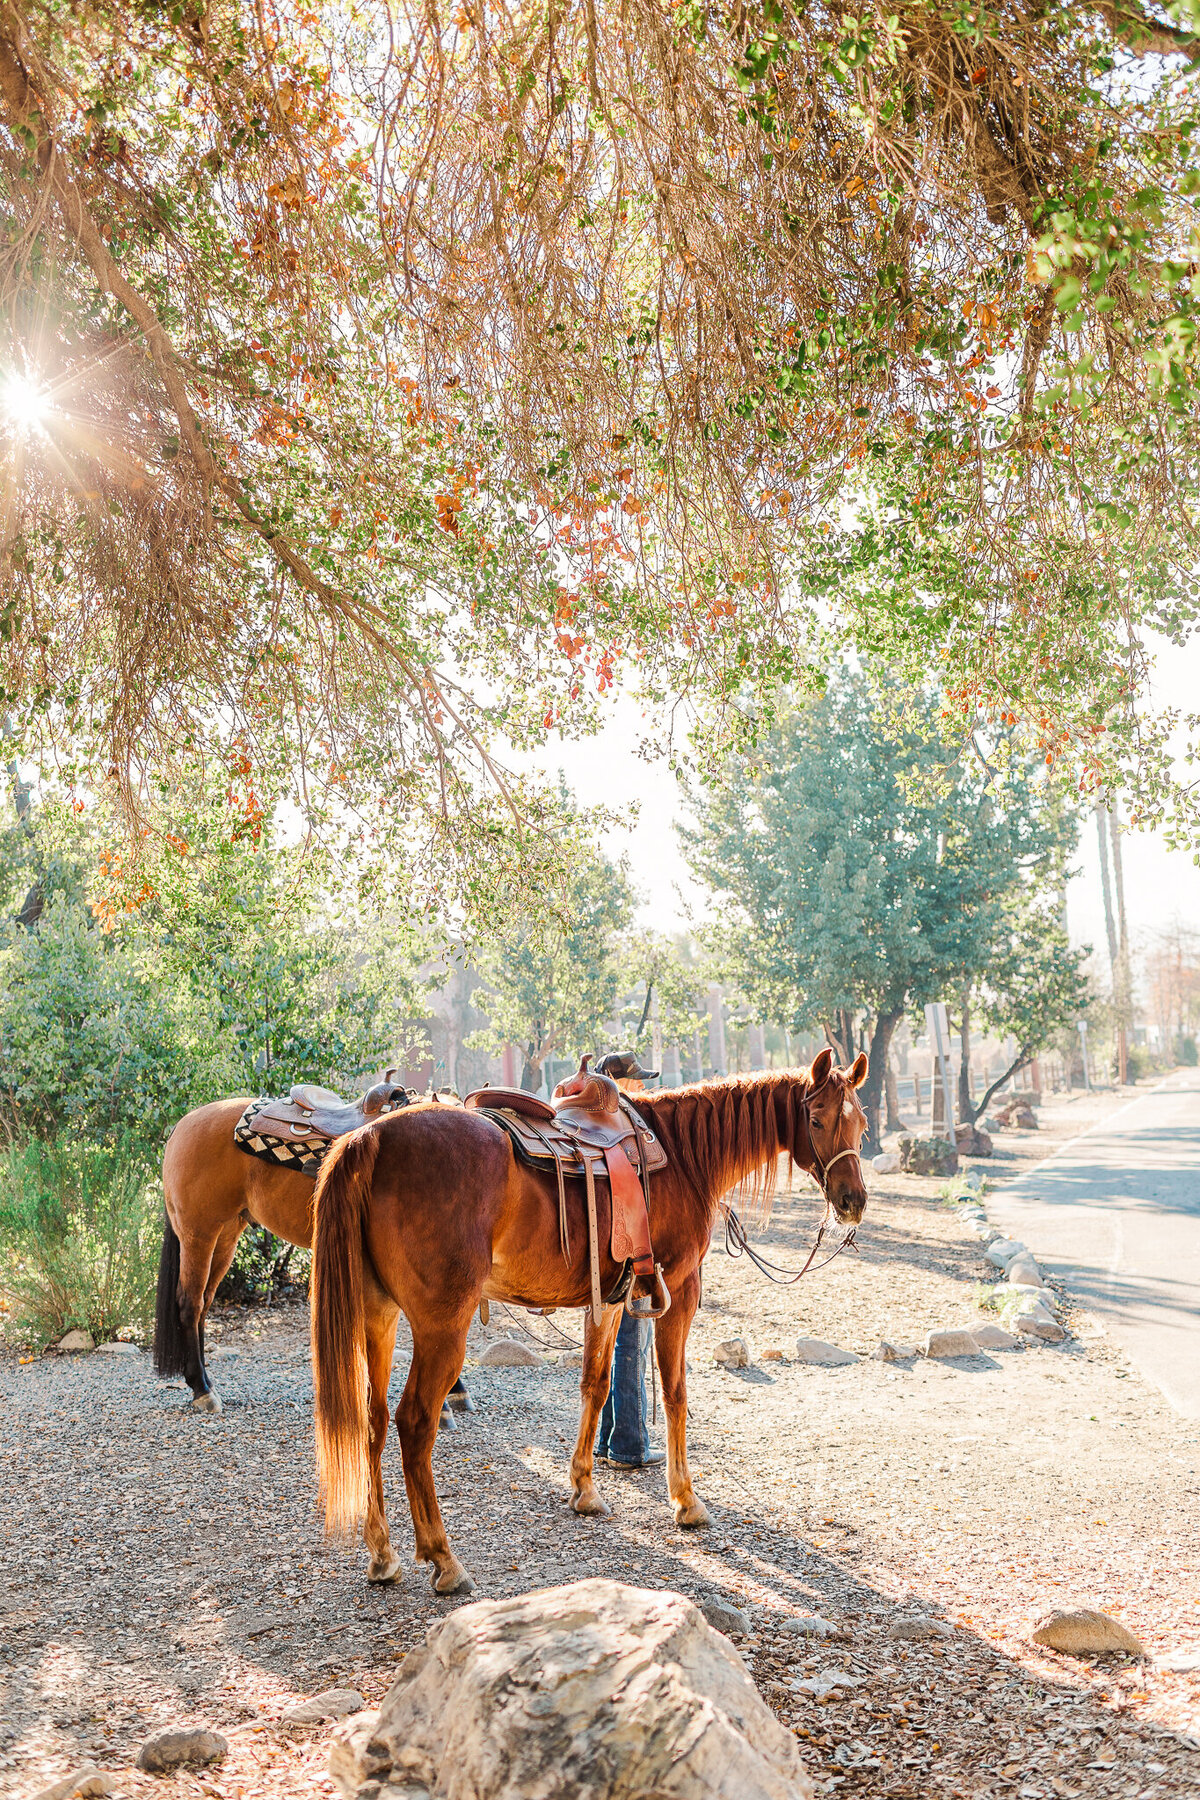 Two brindle horses wait for the other riding along a dirt road in the Los Rios Historic District in San Juan Capistrano, California in the early morning.